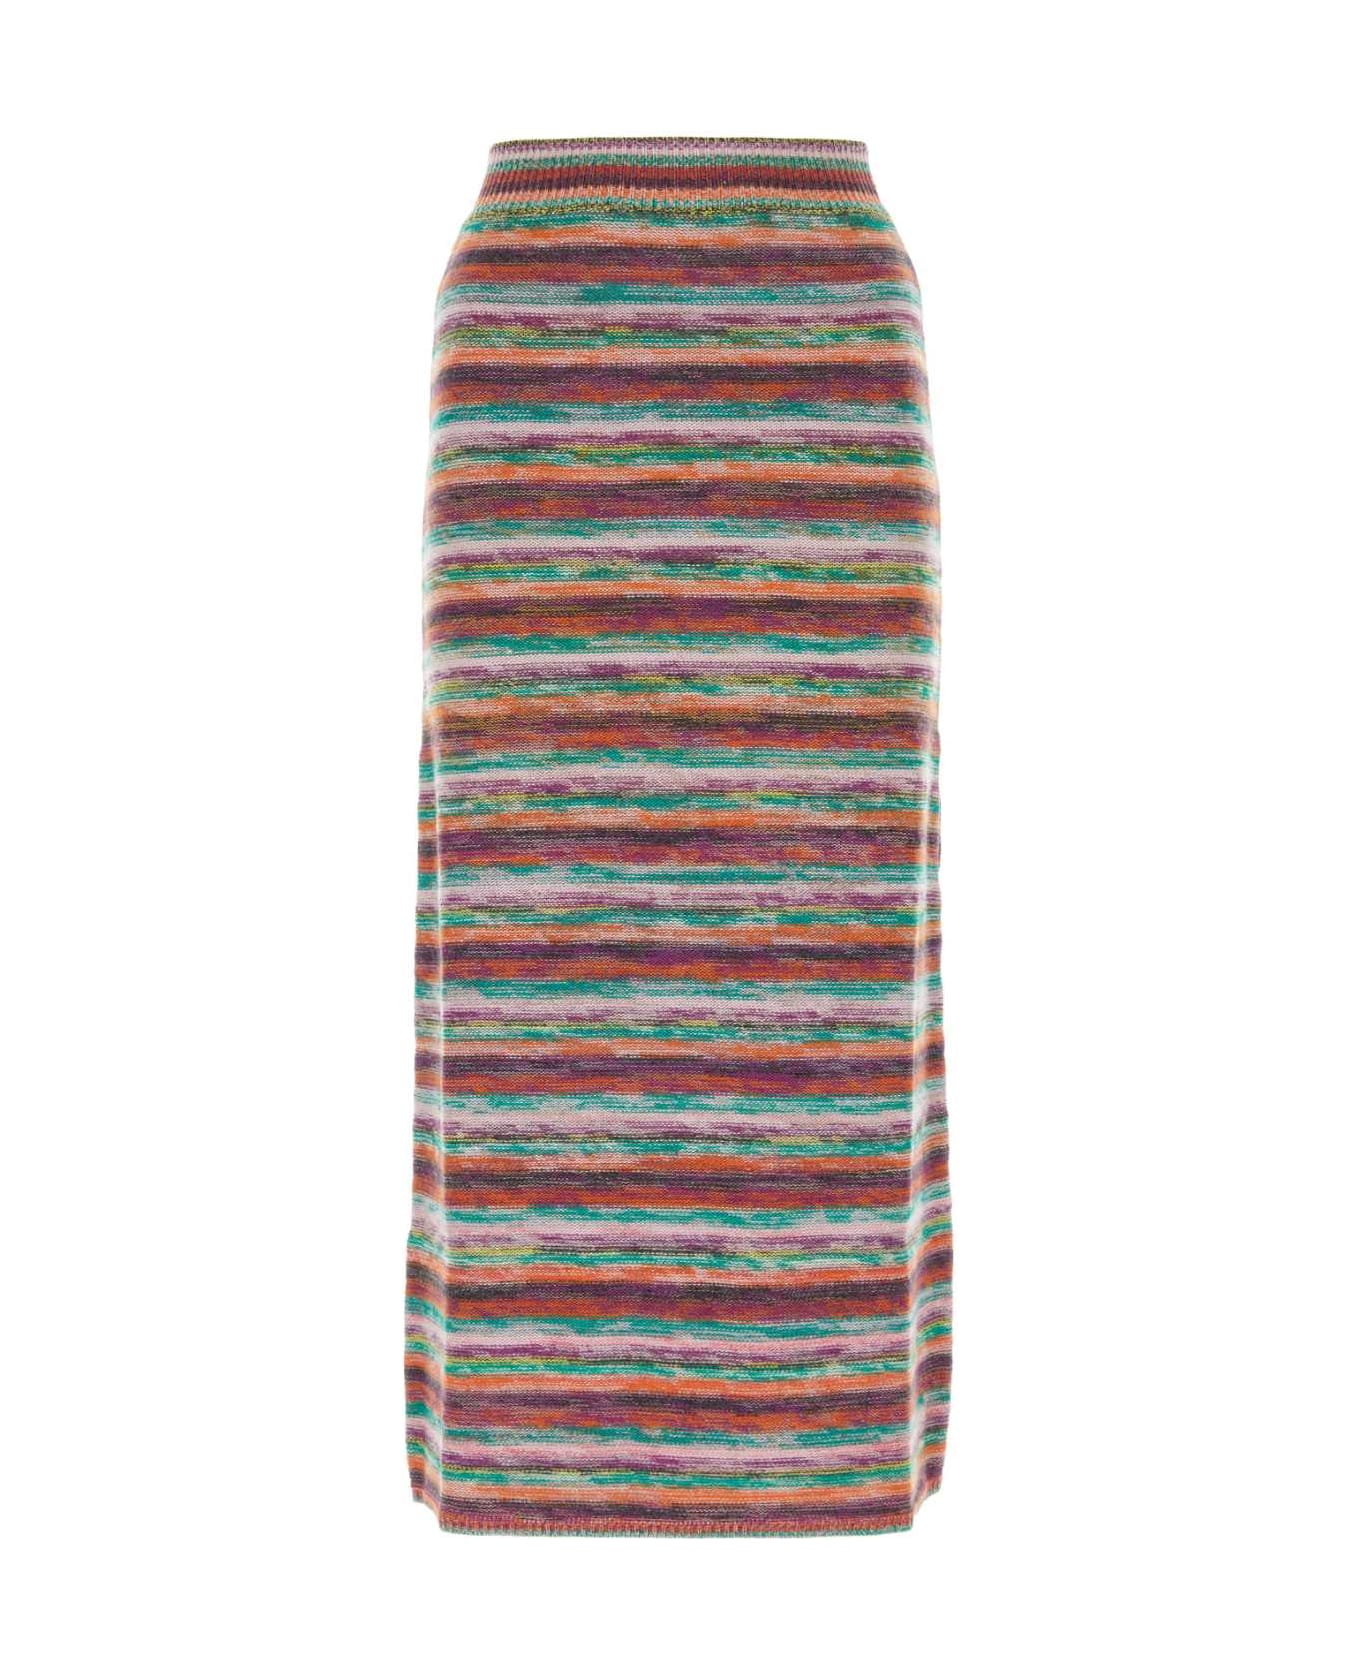 Chloé Embroidered Wool Blend Skirt - MULTICOLORBLACK